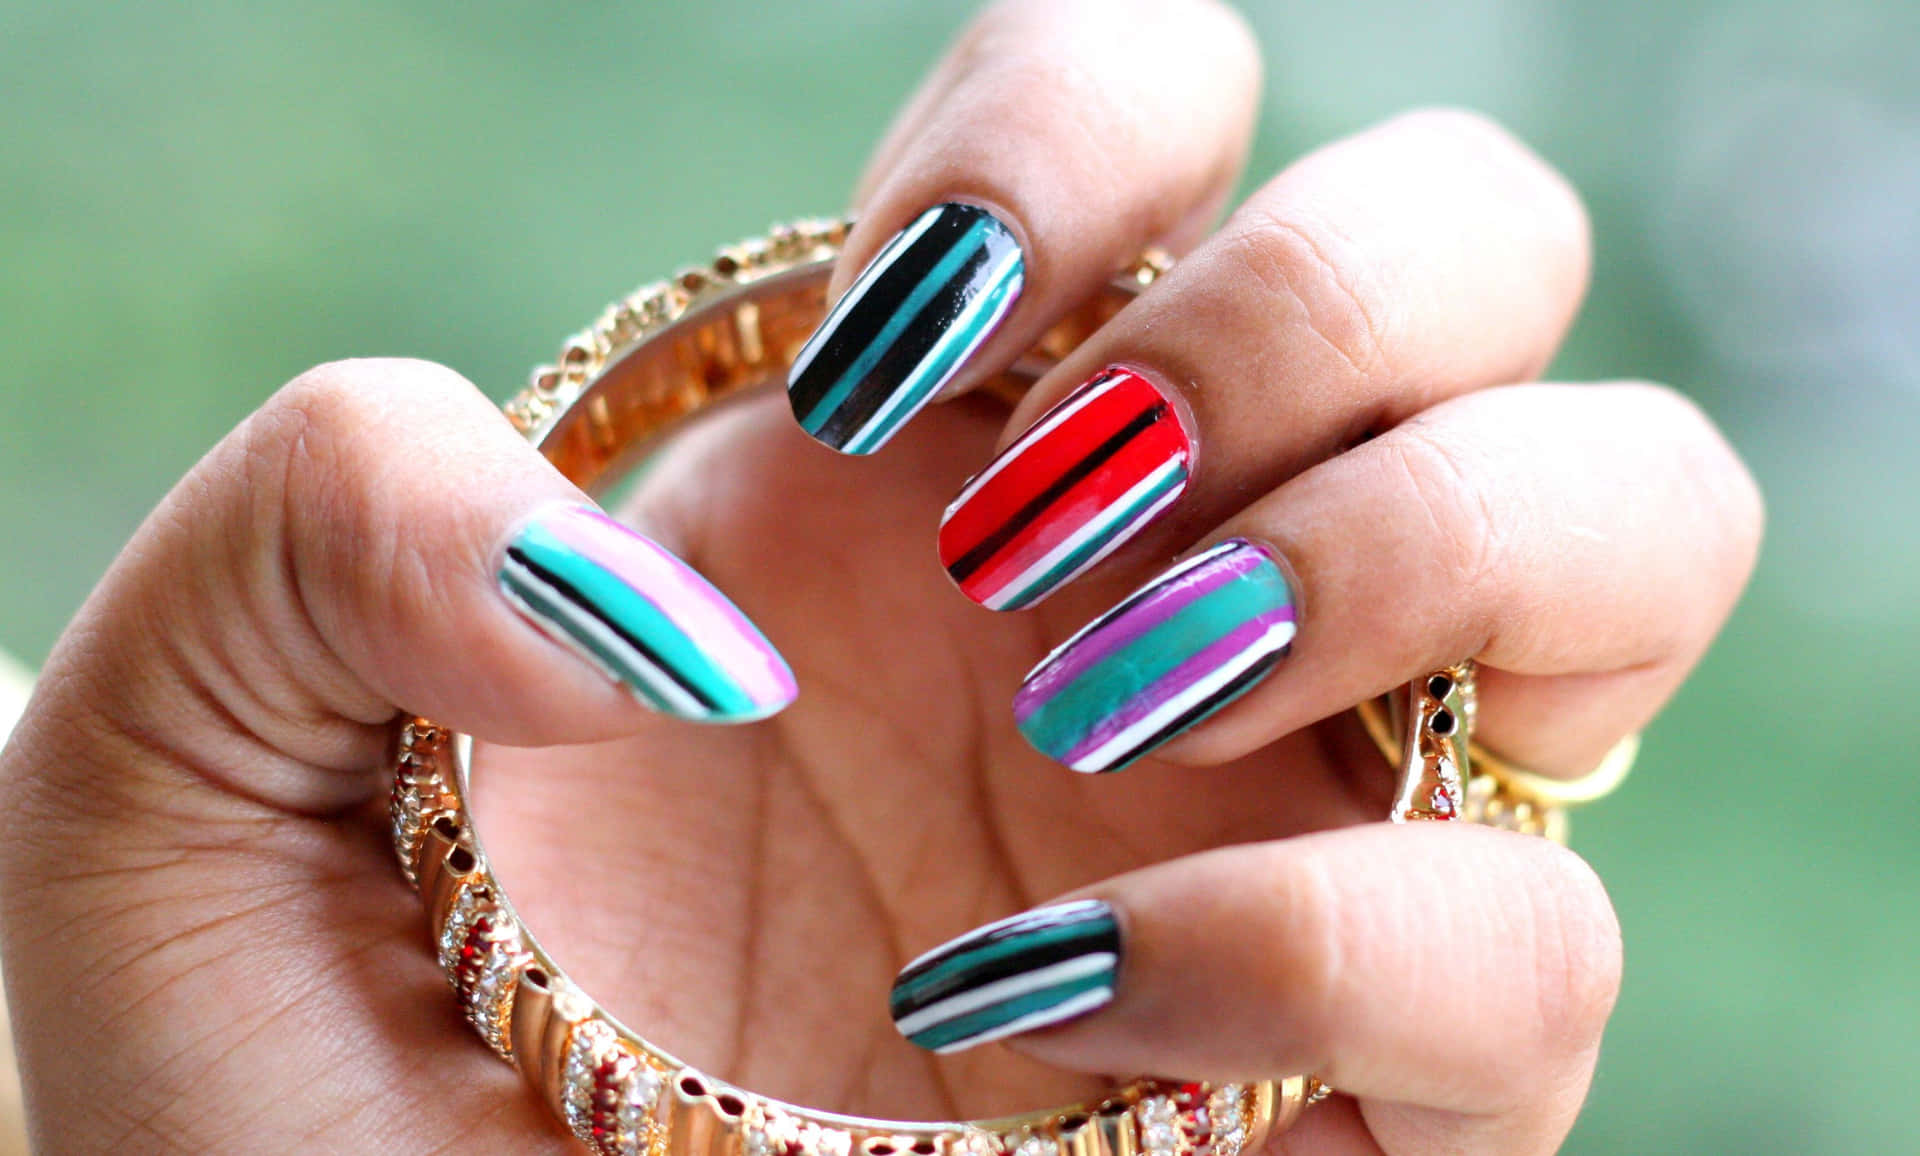 Get fabulous with some new acrylic nails! Wallpaper